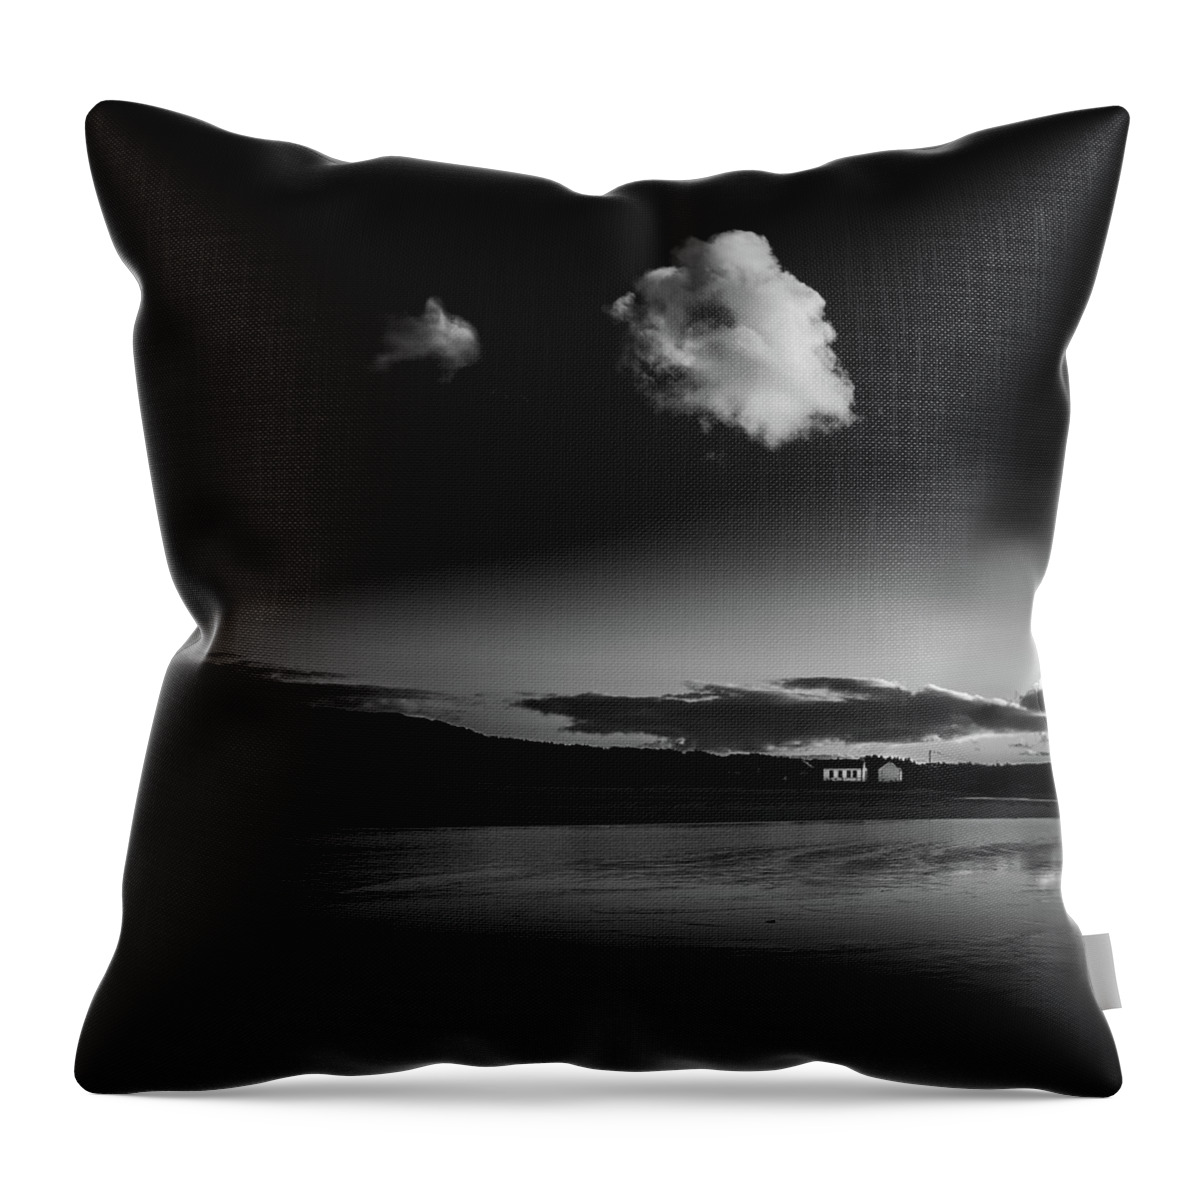 Lonely Throw Pillow featuring the photograph Cloud Cottage by Nigel R Bell